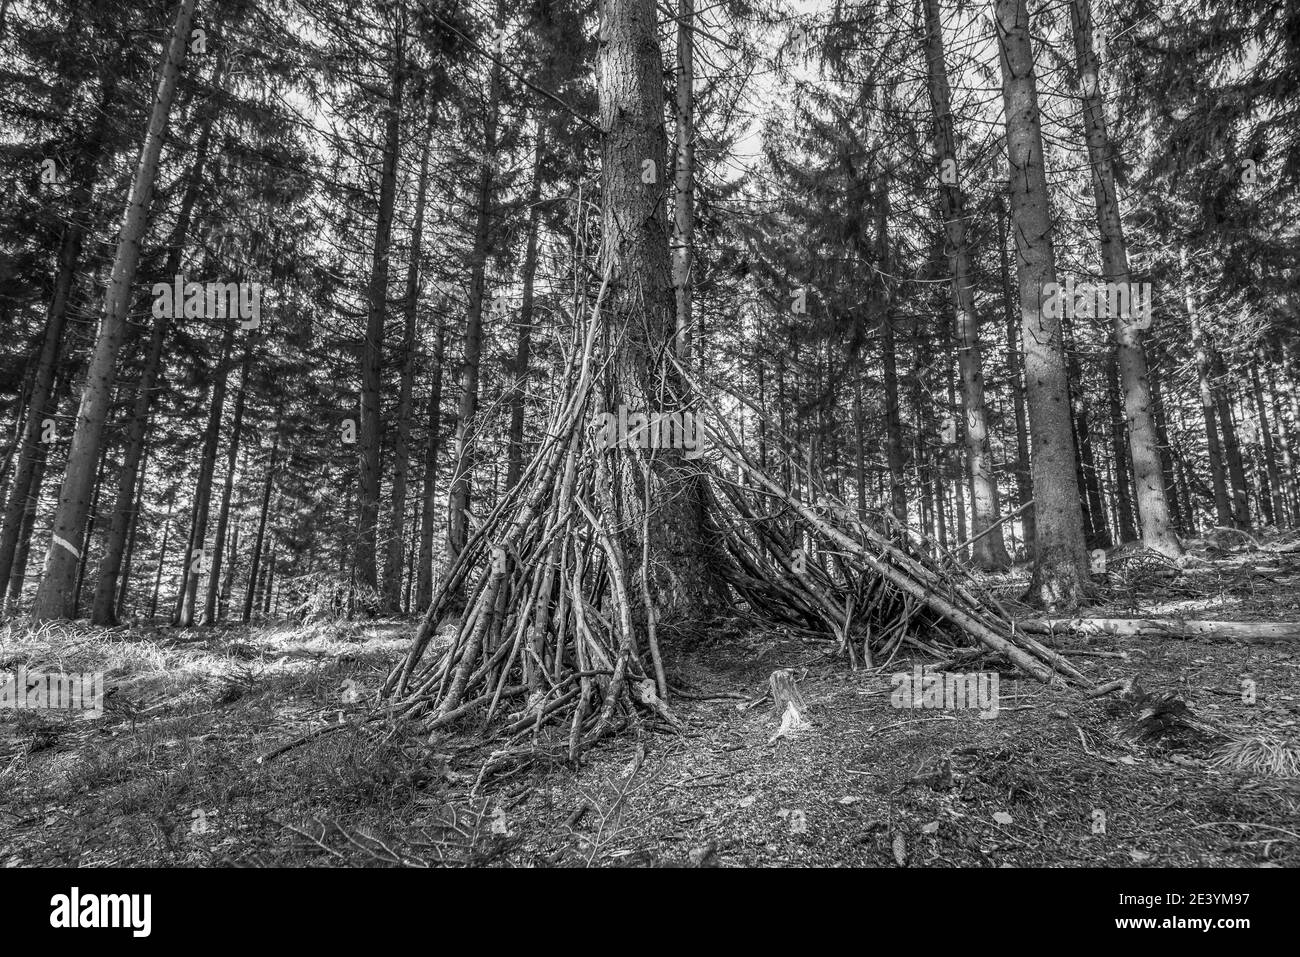 Black and White image With branches like a Tippi self-made shelter in the forest at a tree with campground, Germany Stock Photo